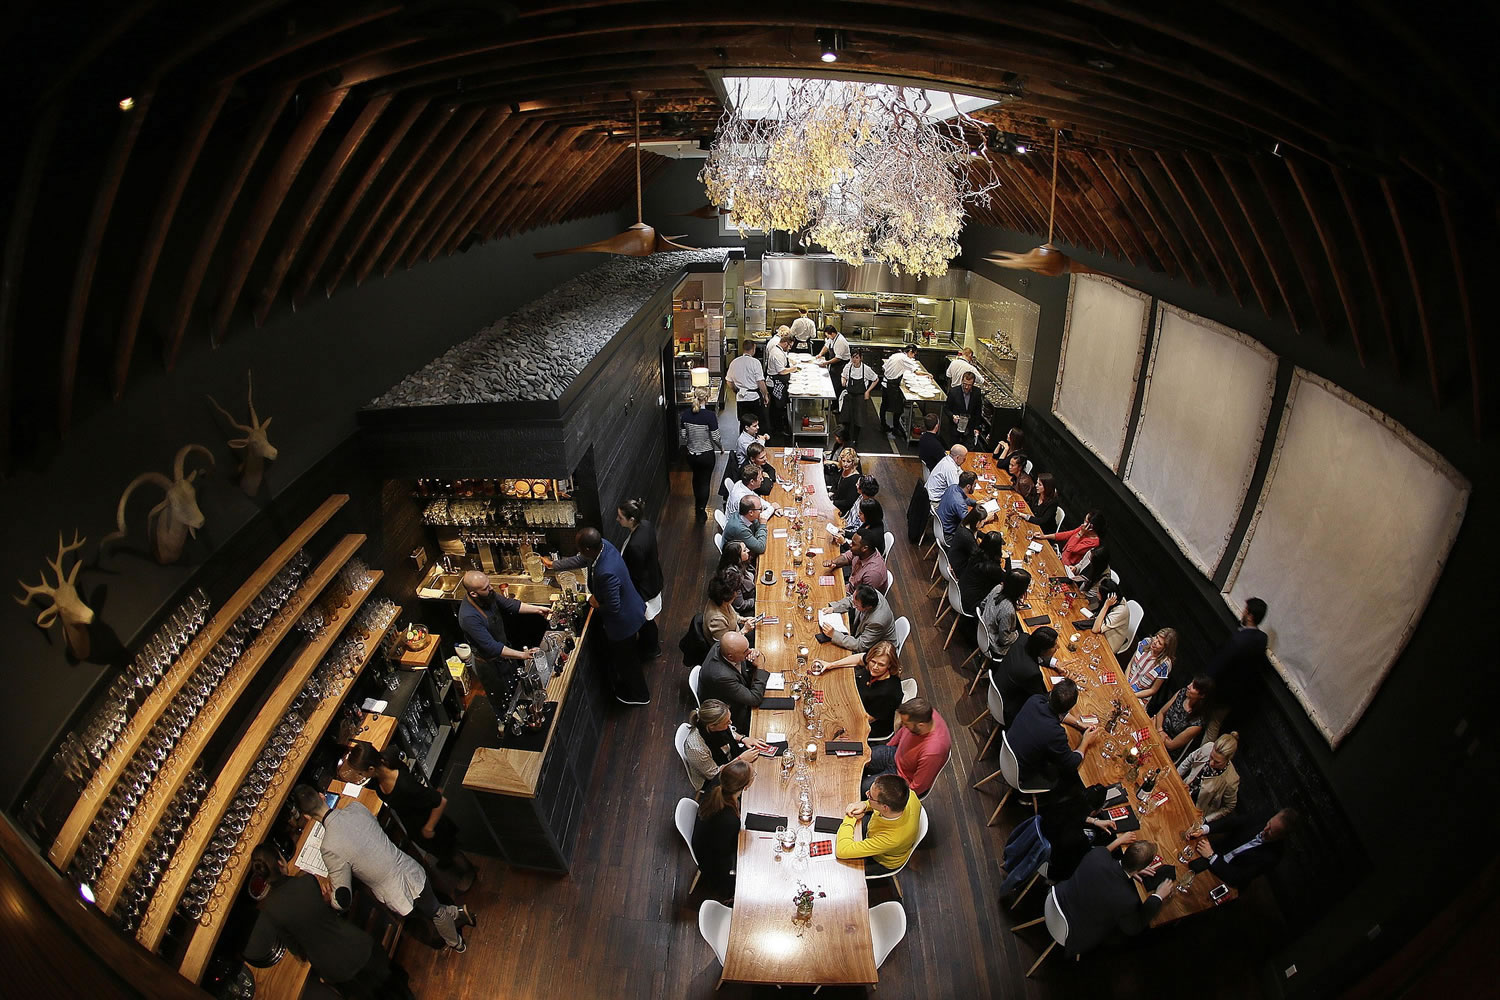 Communal tables are filled with ticketed diners for the first seating at the Lazy Bear restaurant in San Francisco. Lazy Bear uses an increasingly popular ticketing system model for its &quot;reservations&quot; that asks diners to pay up front for their meals much the way theater patrons pay for their seats.